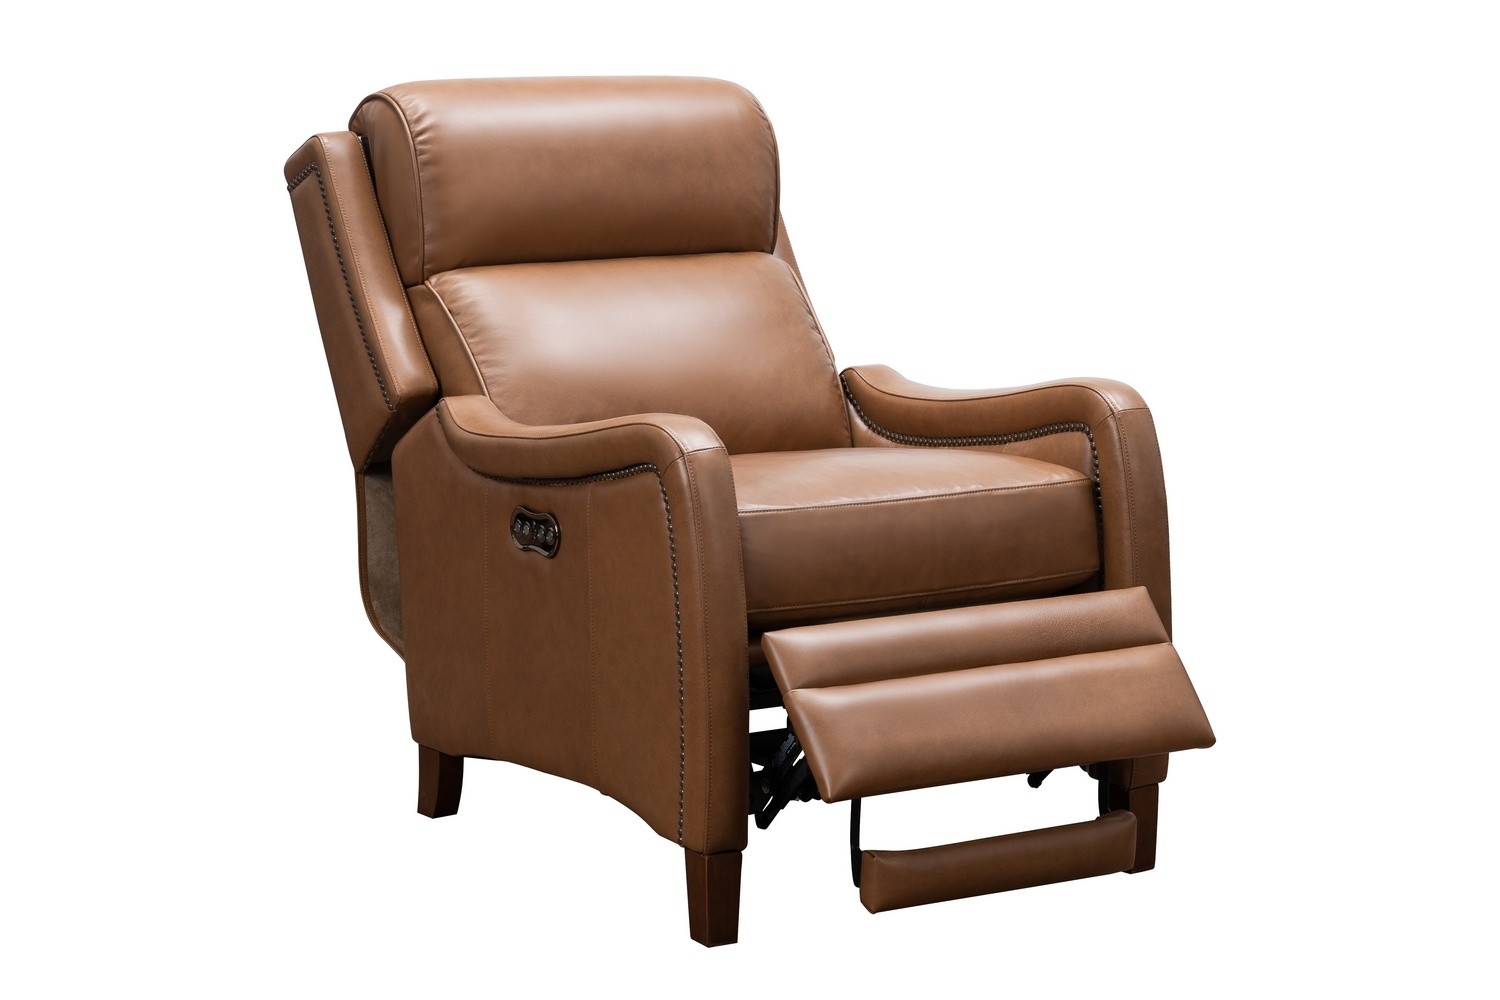 Barcalounger Williamson Power Recliner Chair with Power Head Rest - Bennington Saddle/All Leather